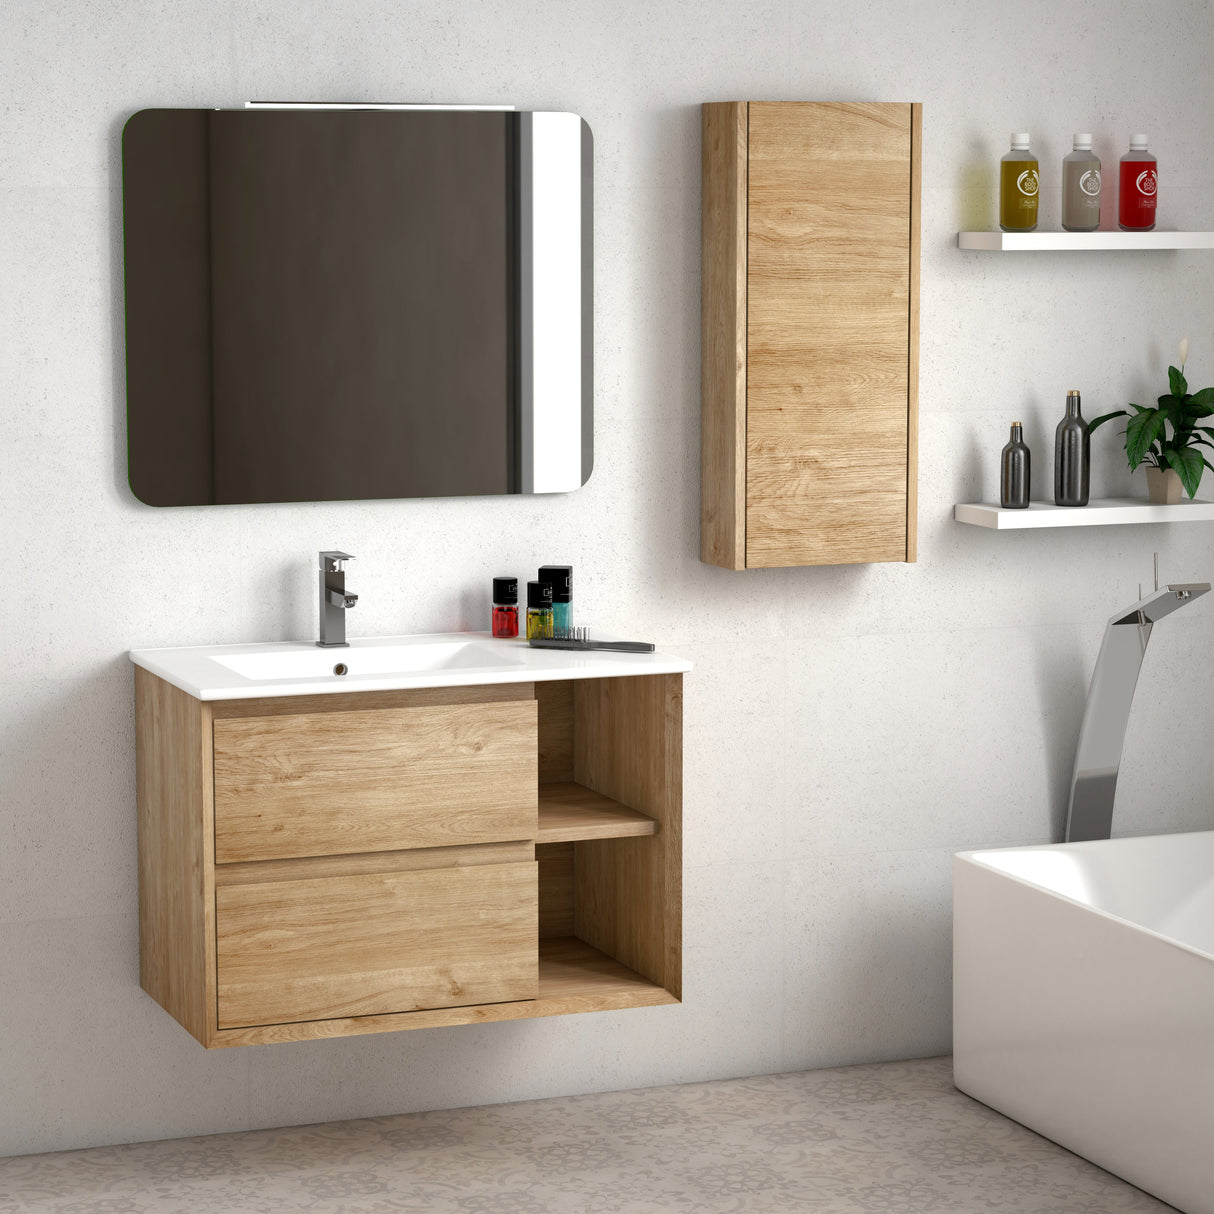 DAX Oceanside Engineered Wood and Porcelain Left Onix Basin with Single Vanity, 36", Oak DAX-OCE013614-ONX